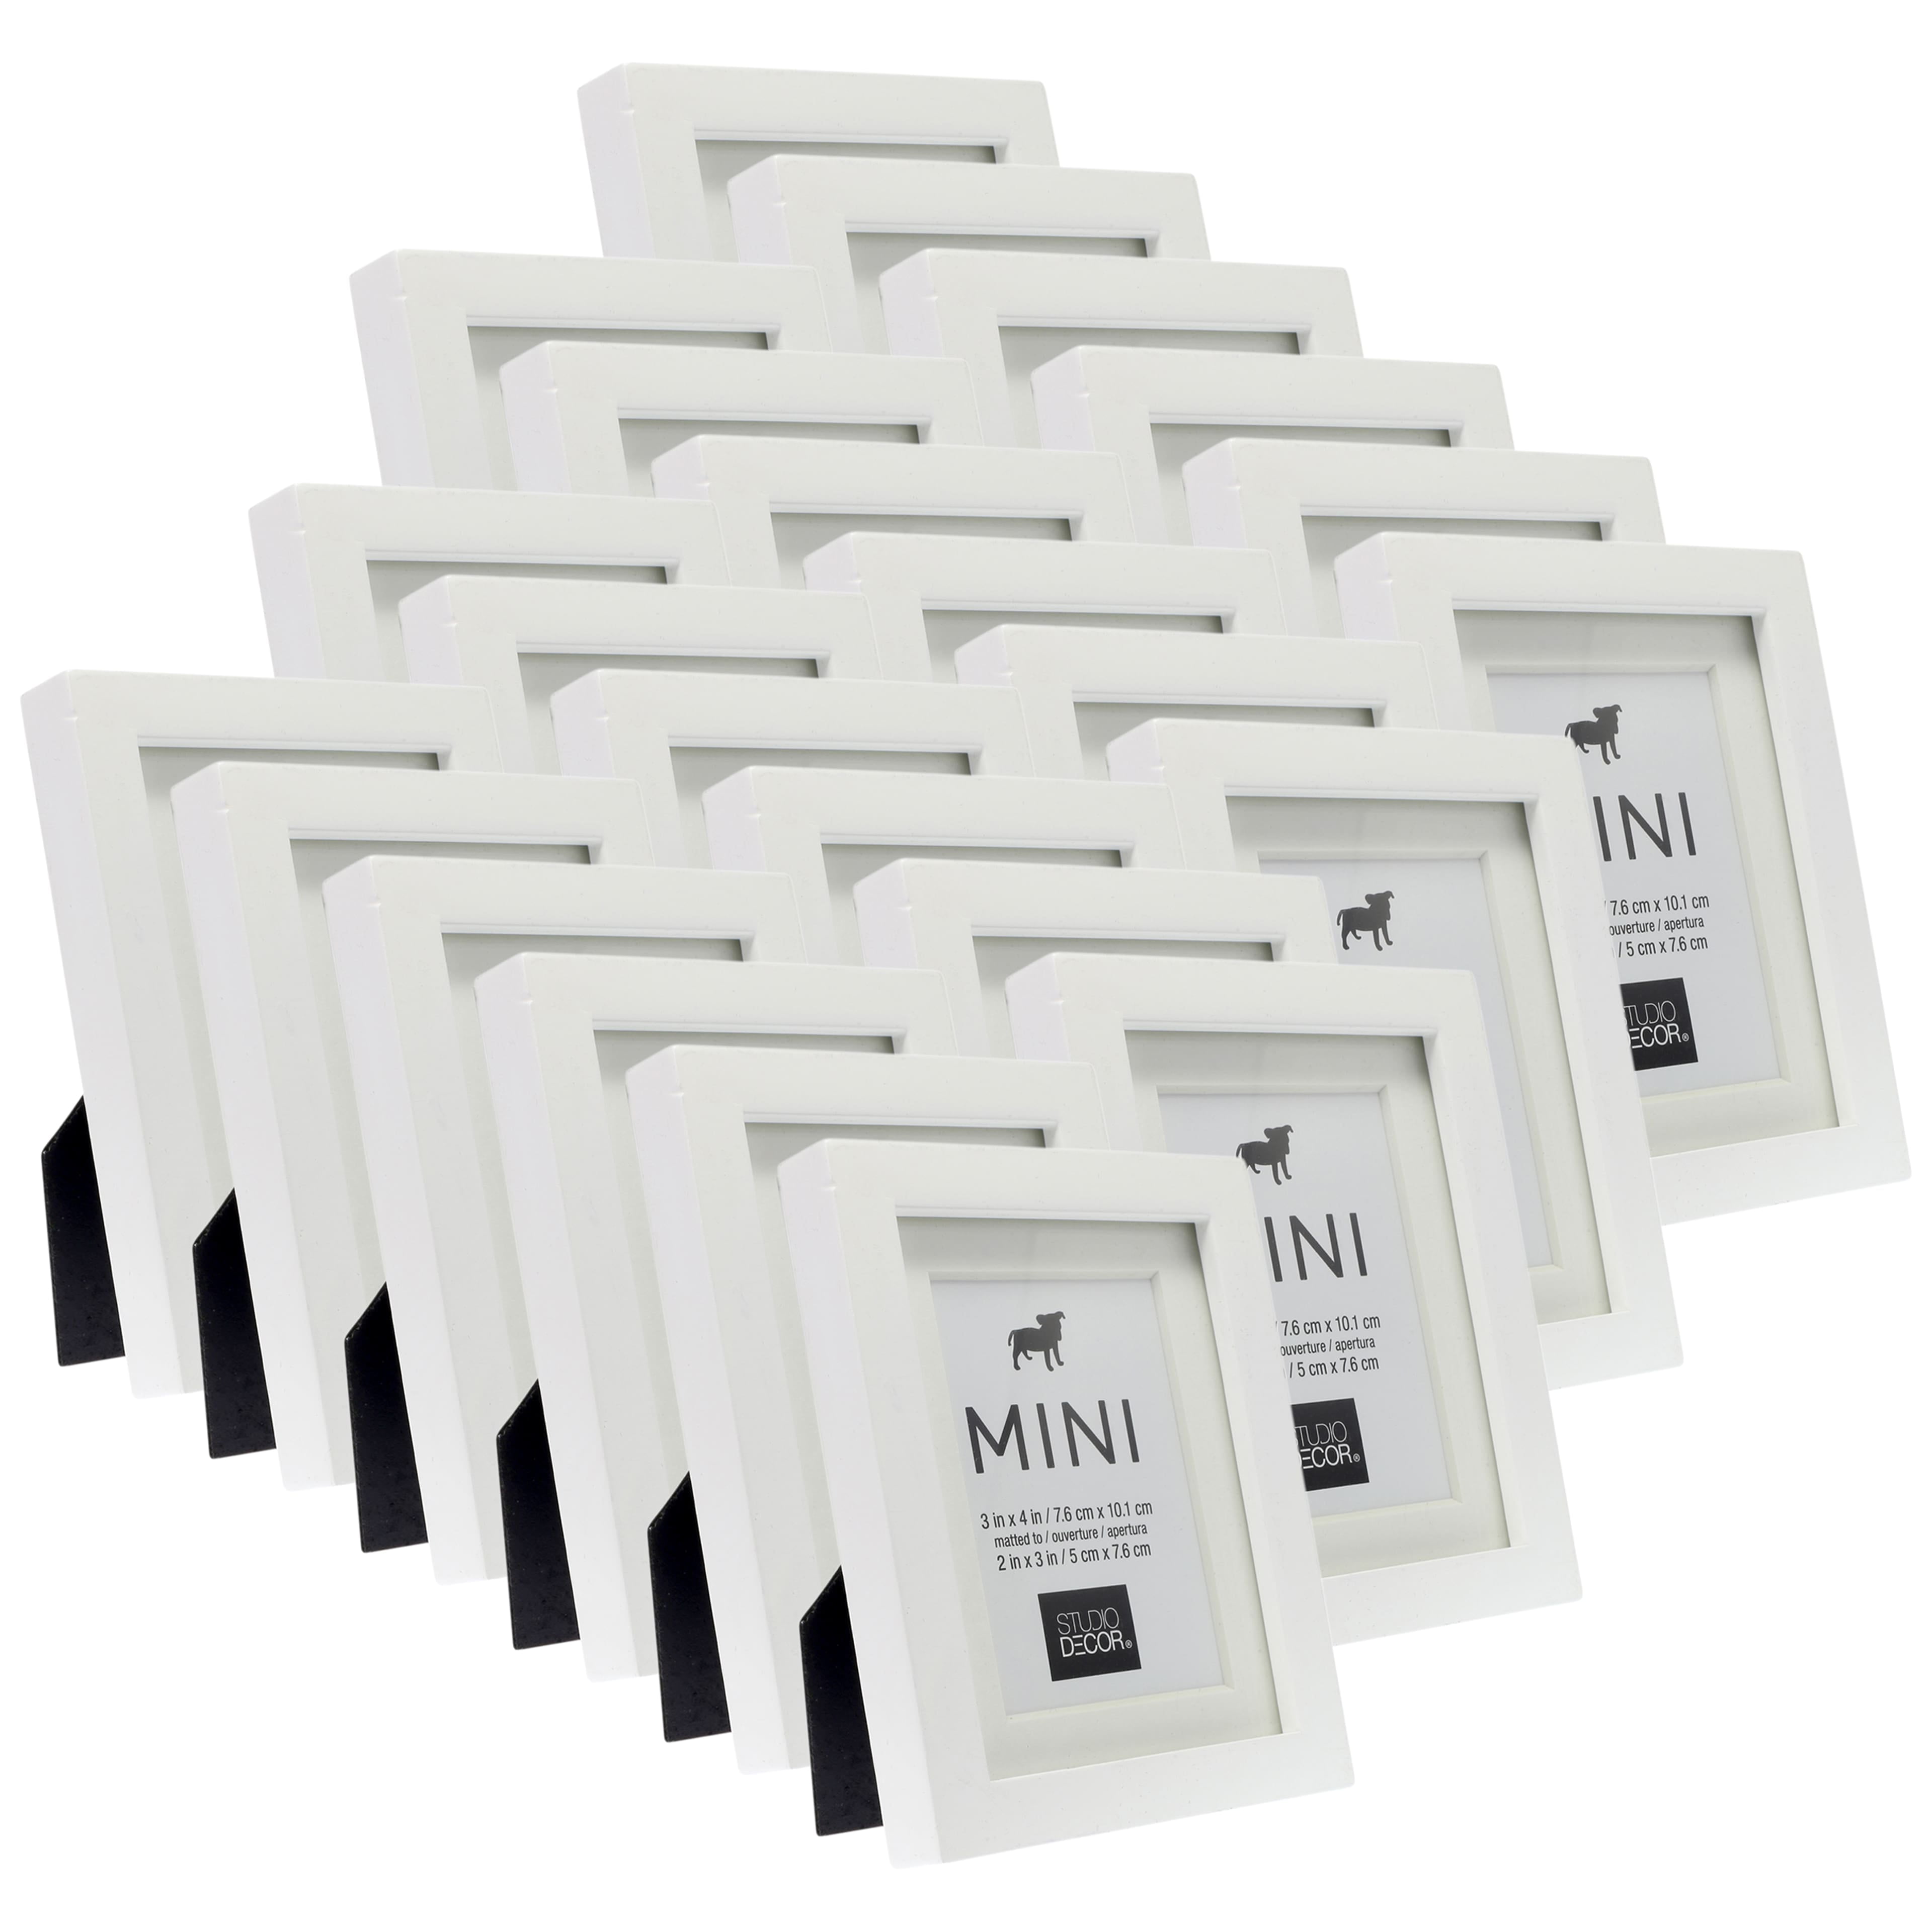 4 Pack of Mini Frames by Studio Décor